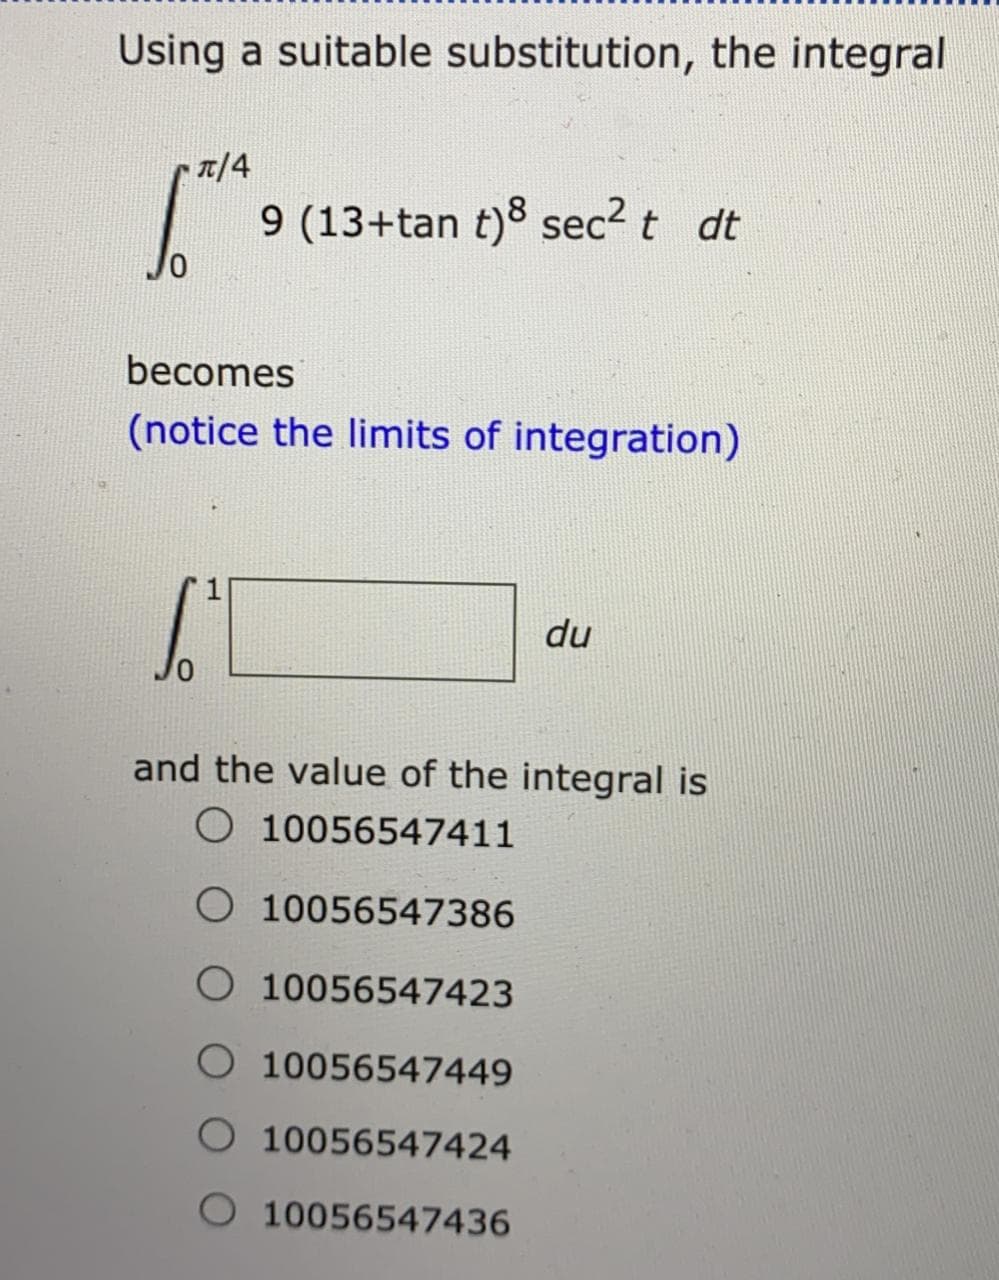 Using a suitable substitution, the integral
T/4
9 (13+tan t)8 sec? t dt
becomes
(notice the limits of integration)
du
and the value of the integral is
O 10056547411
O 10056547386
O 10056547423
O 10056547449
O 10056547424
10056547436
